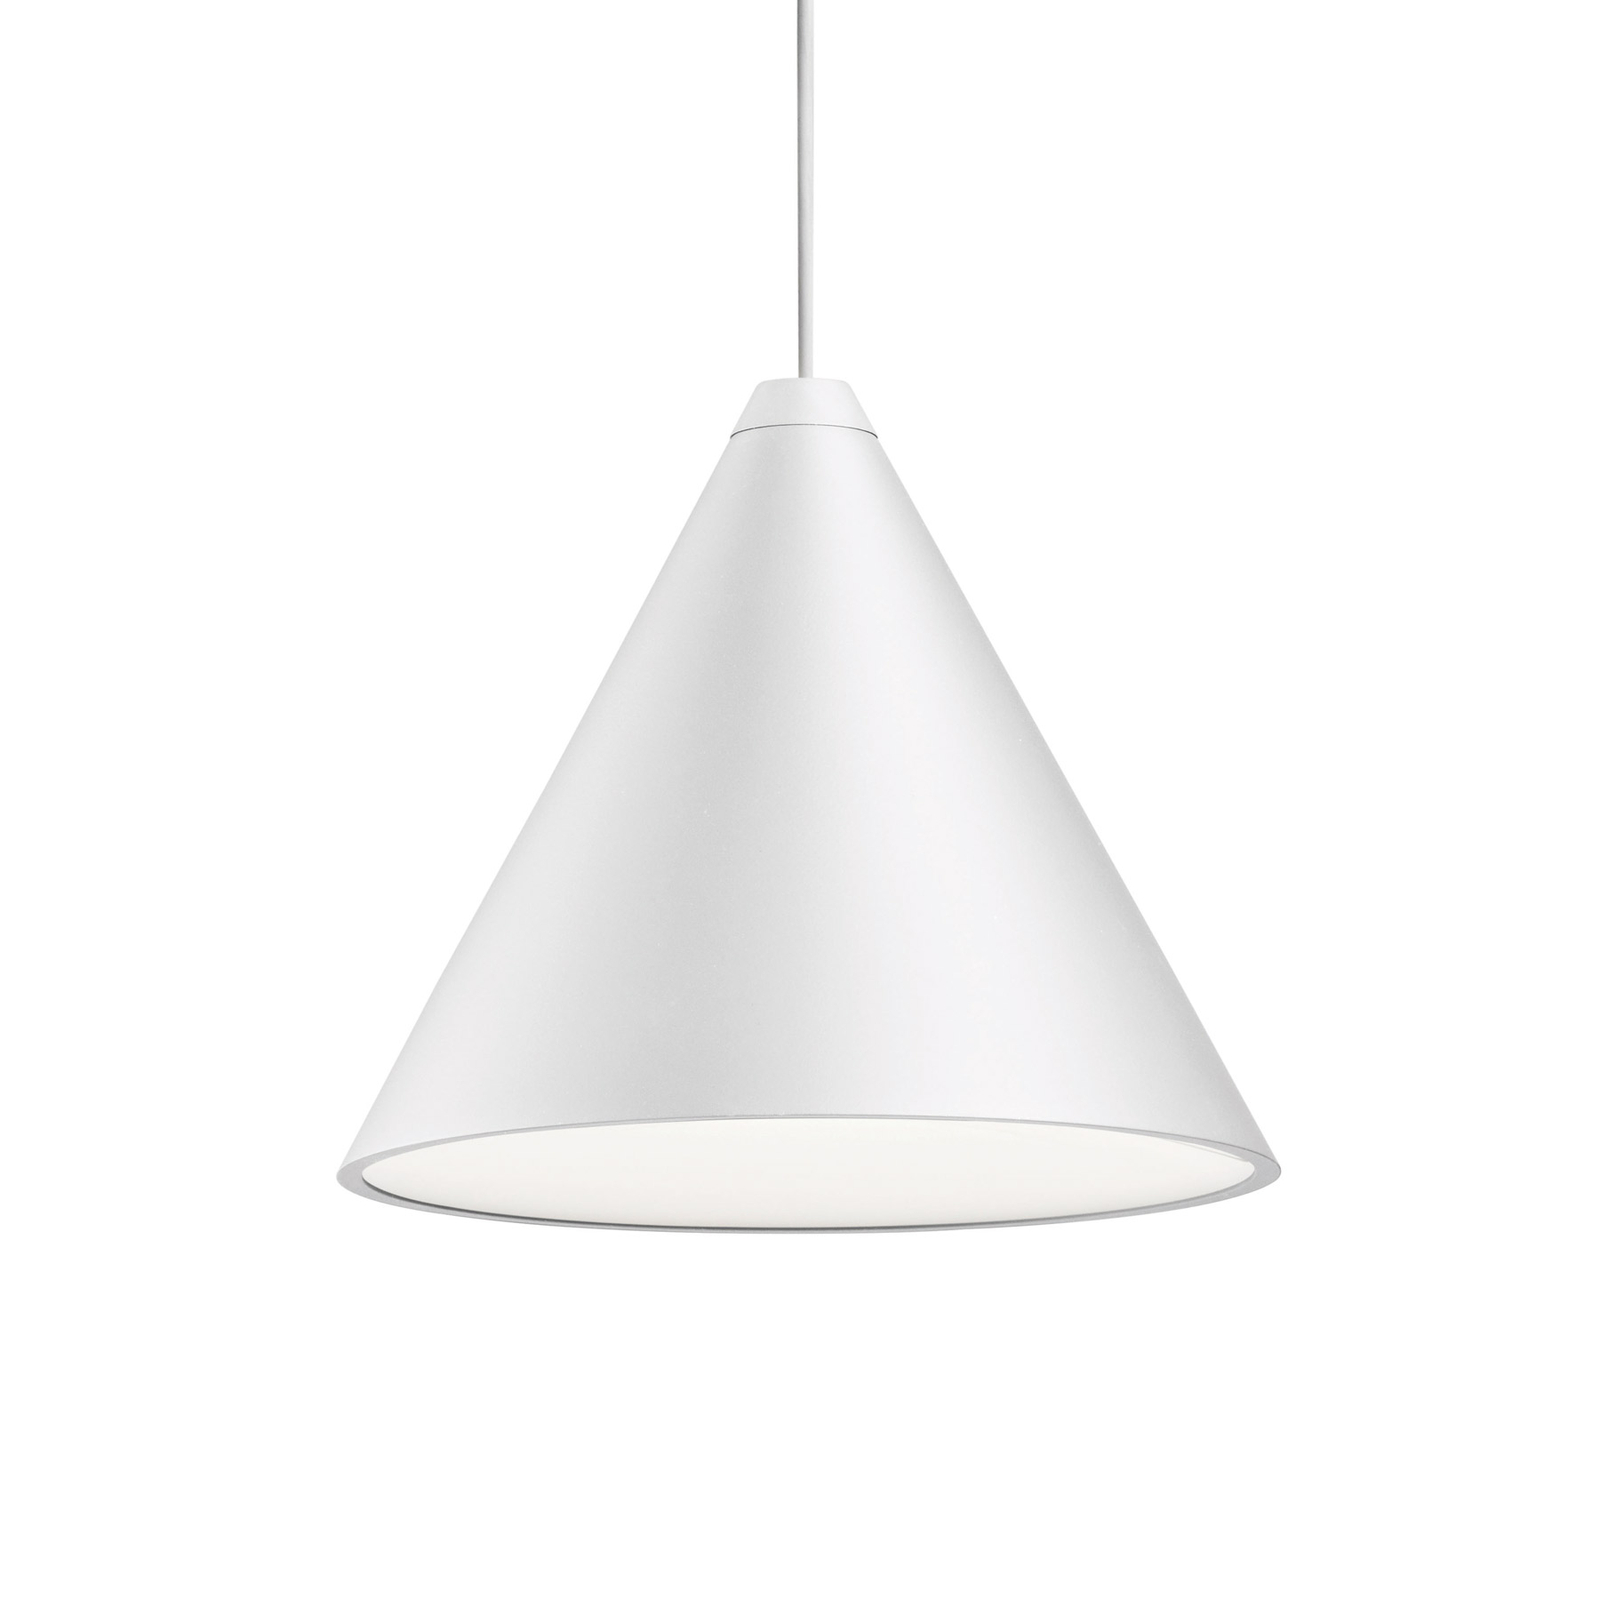 FLOS String Light Cone hanglamp wit 12m Touch